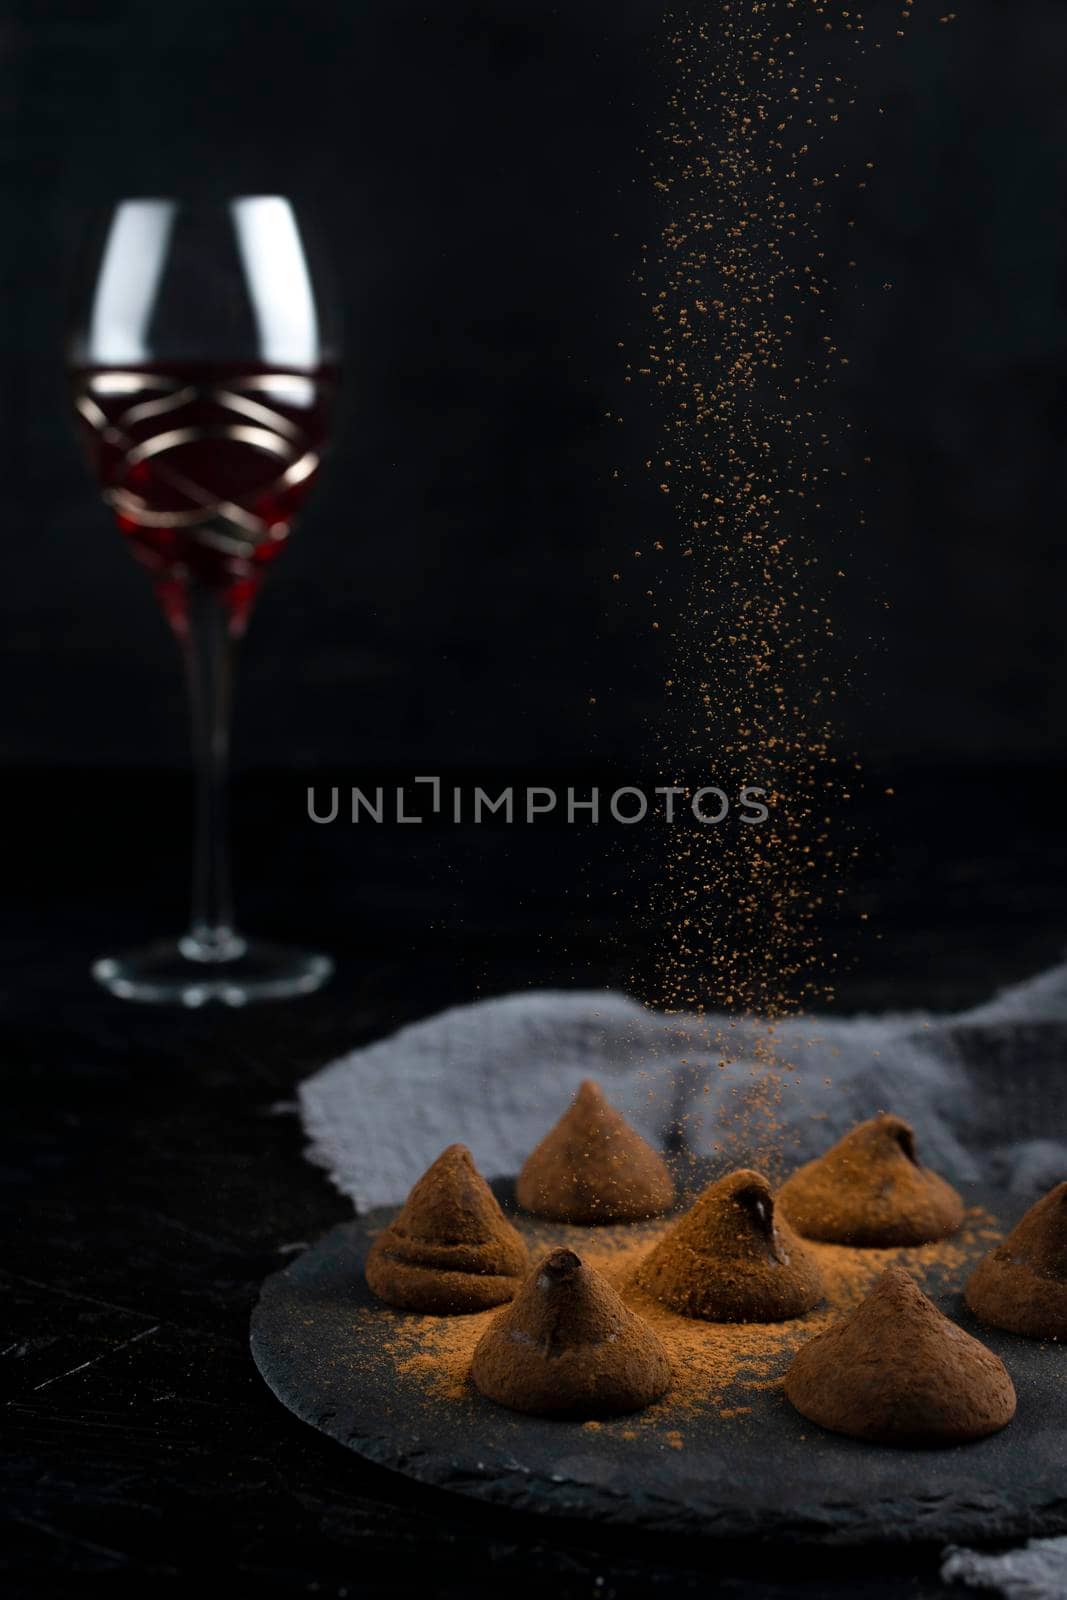 Delicious chocolate truffles and red wine on black background.